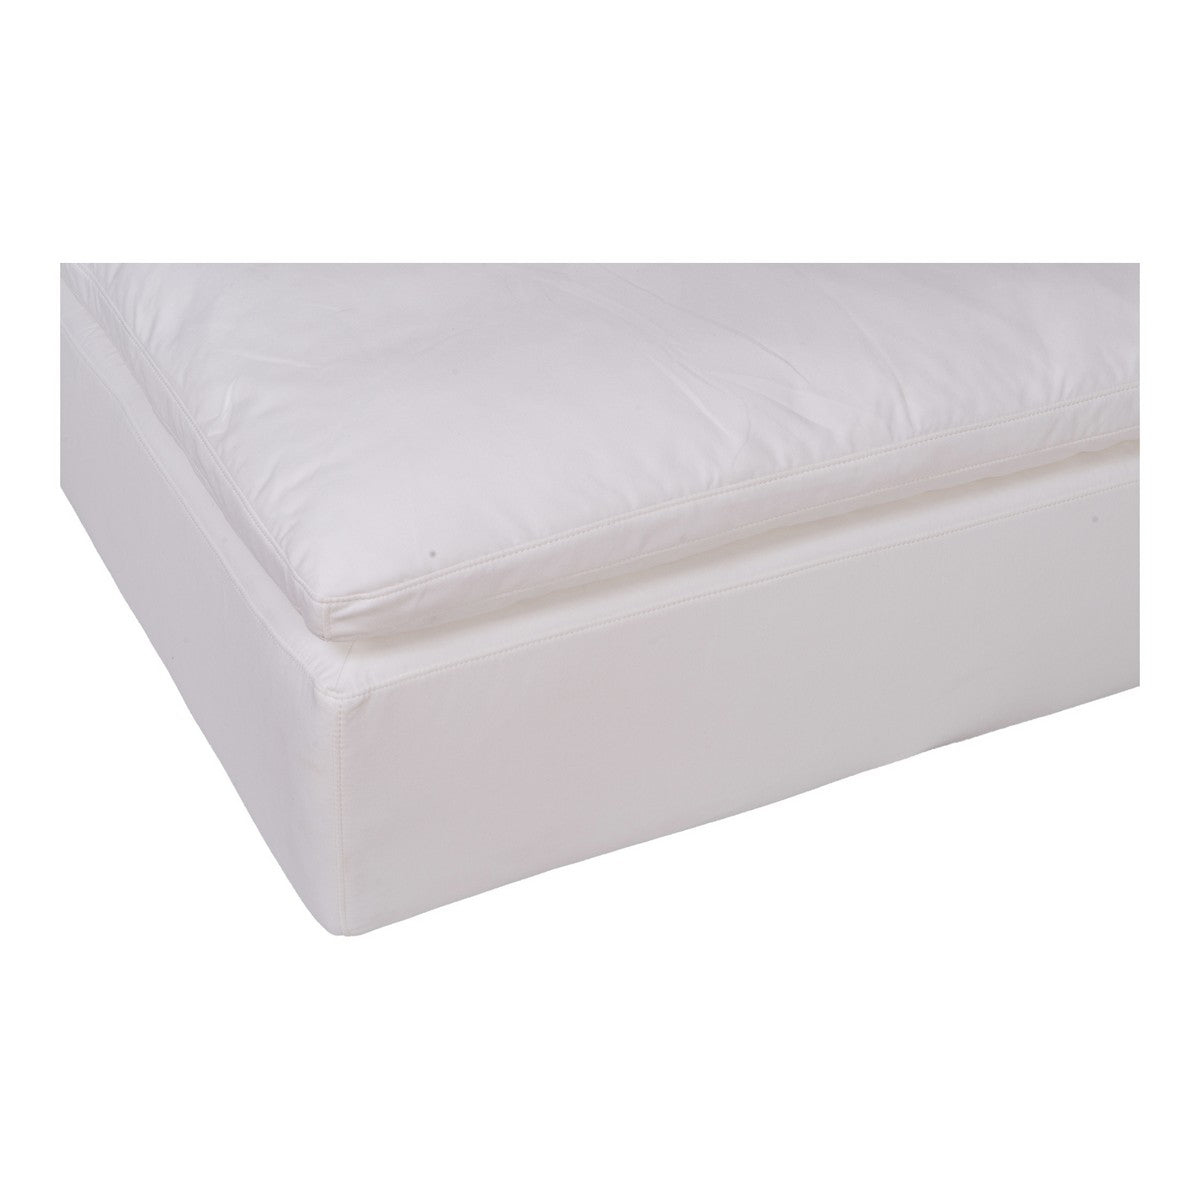 Moe's Home Collection Clay Ottoman Livesmart Fabric Cream - YJ-1002-05